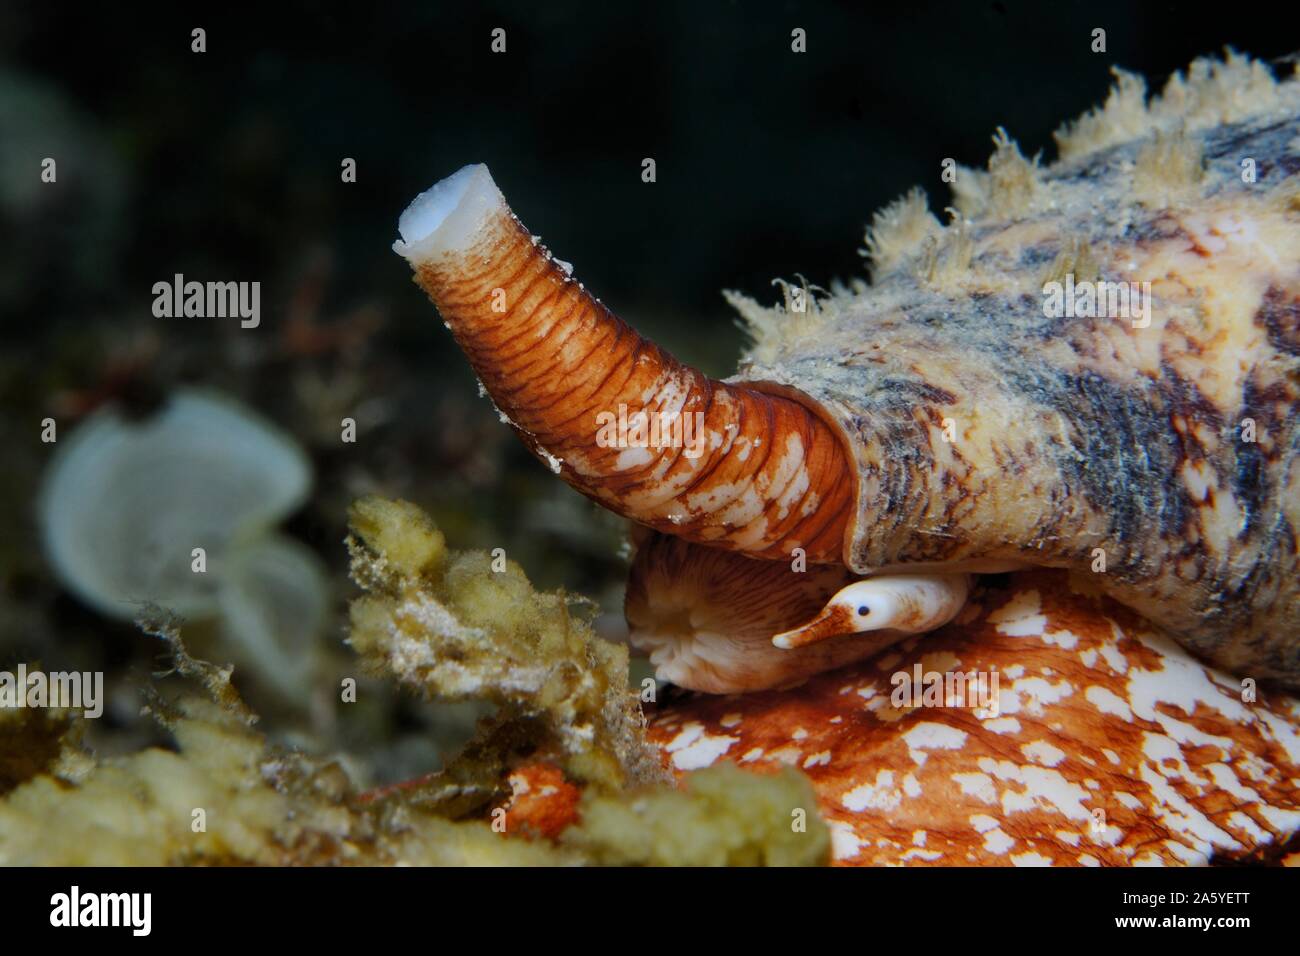 A highly venomous Geography cone (Conus geographus (Lat)) with siphon raised up and eye stalk extended, Panglao, Philippines Stock Photo